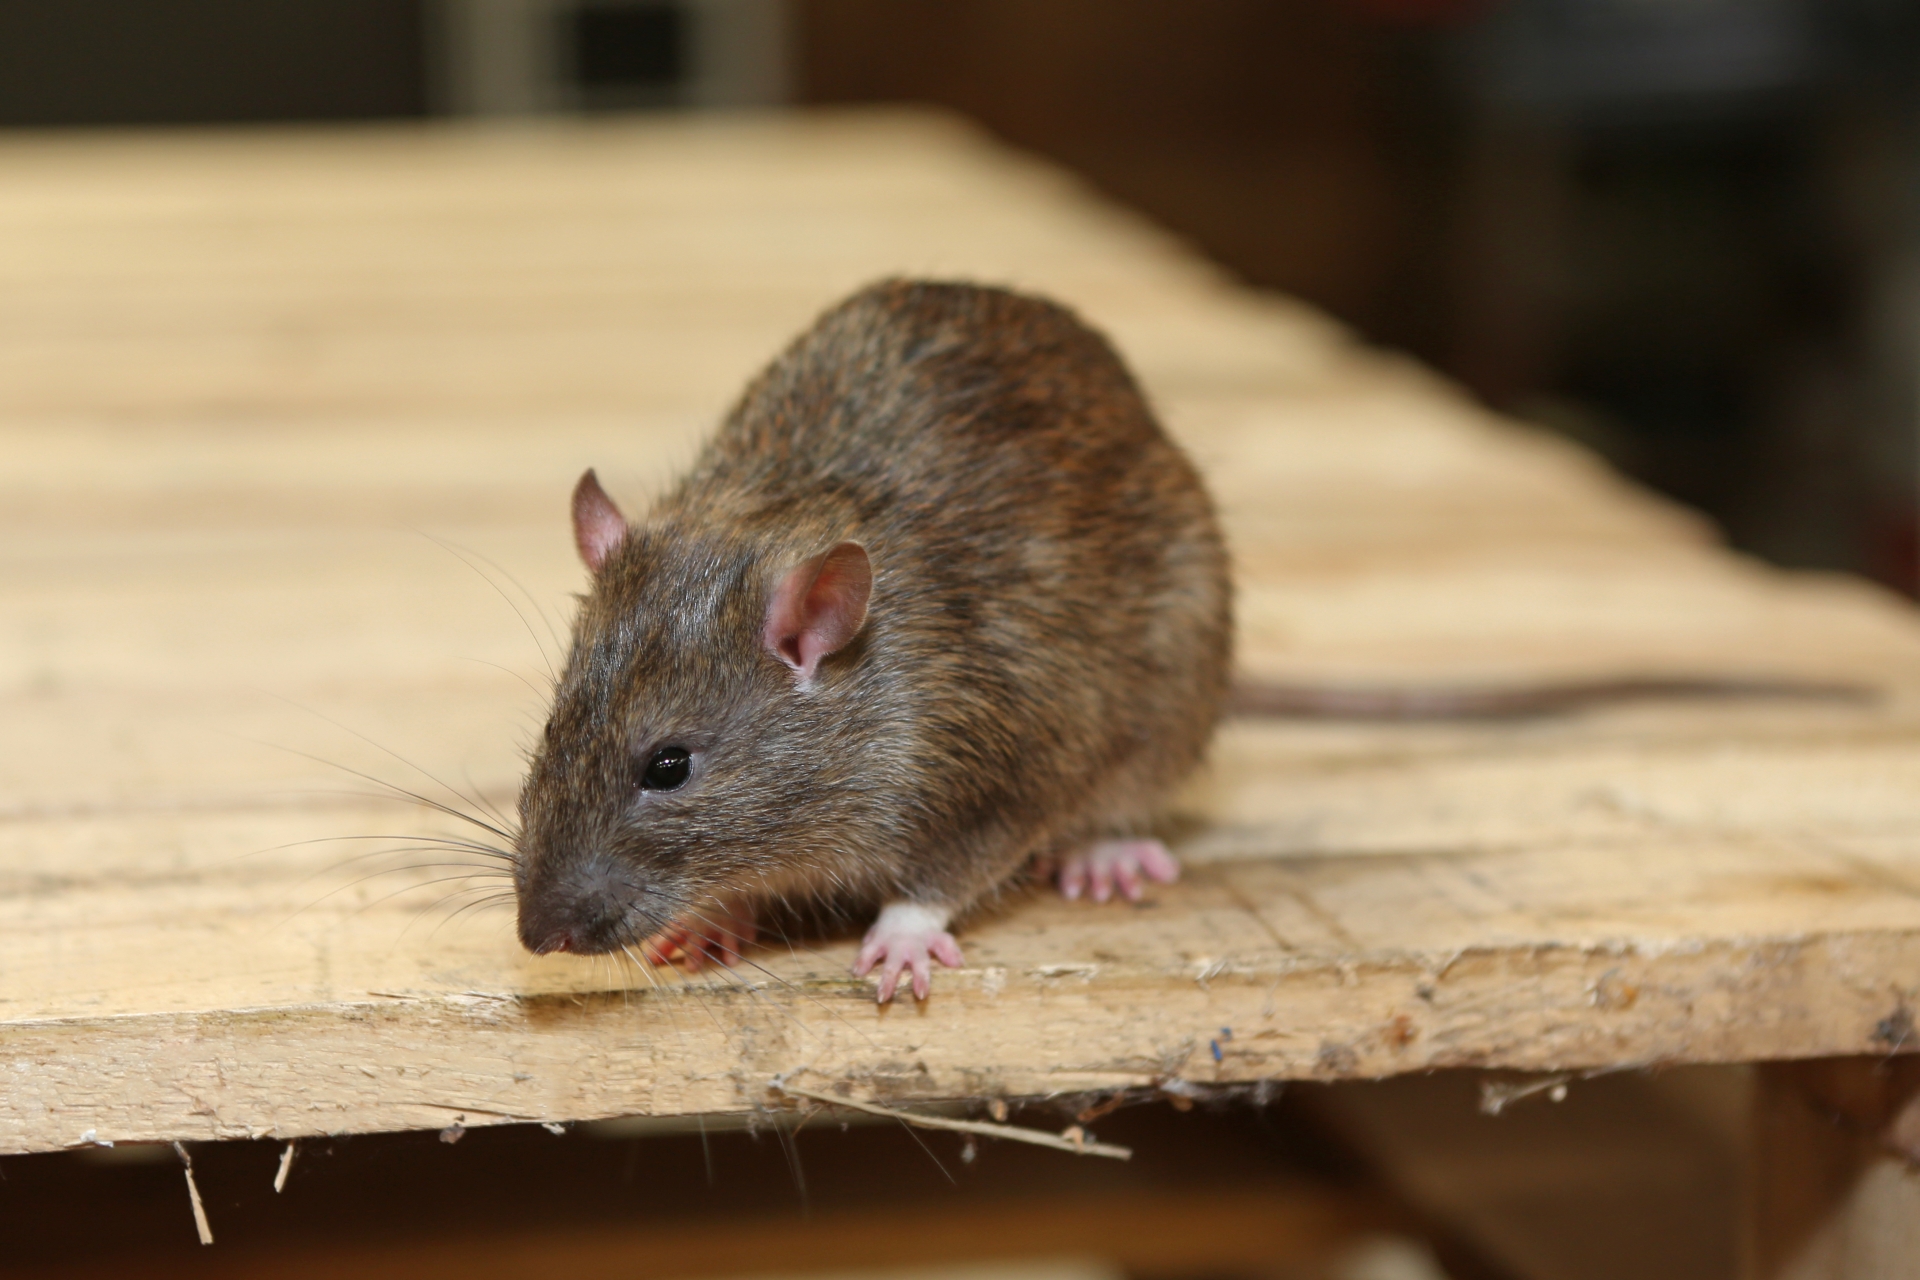 Rat Infestation, Pest Control in Winchmore Hill, N21. Call Now 020 8166 9746